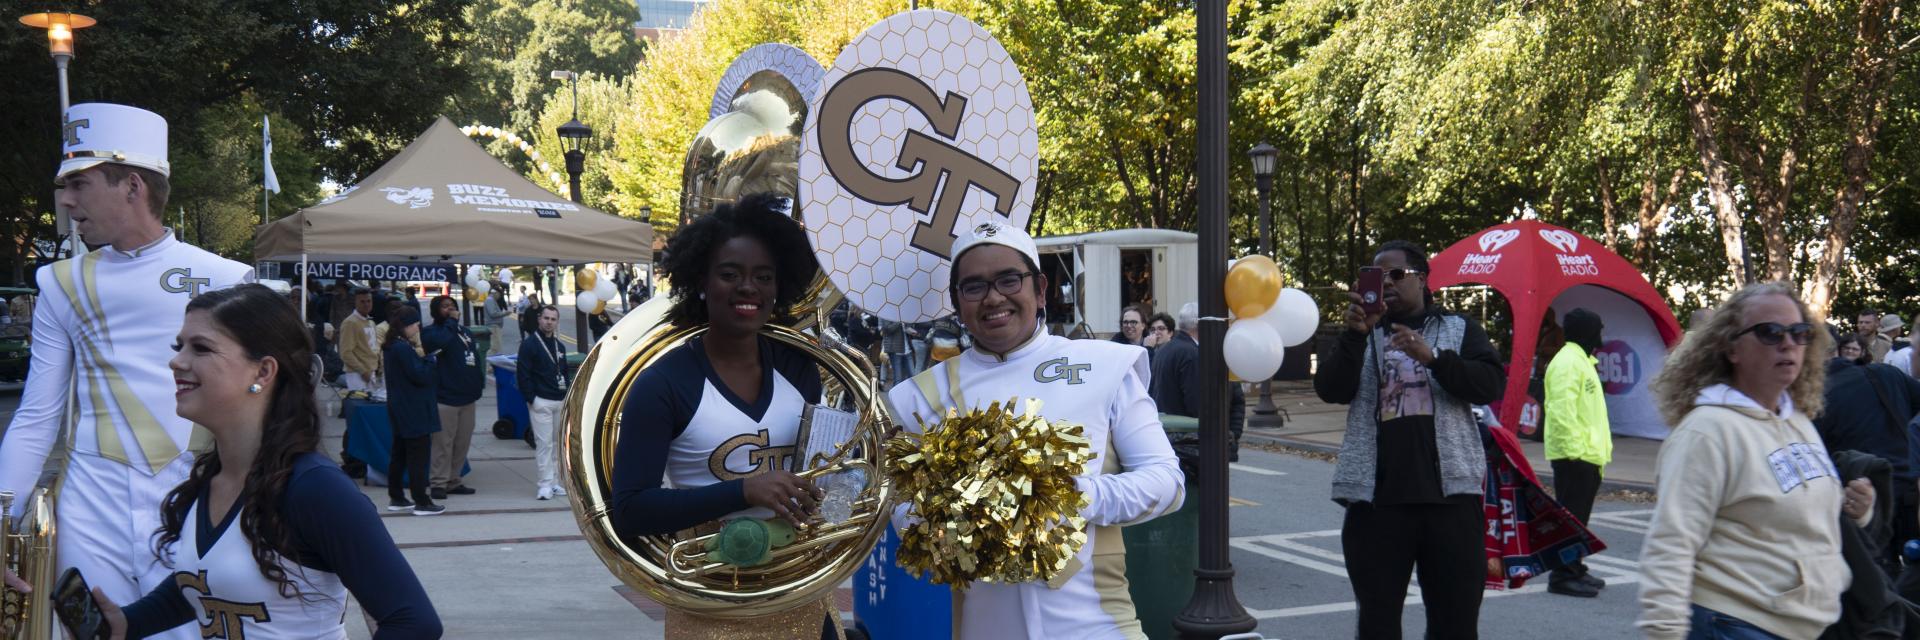 A cheerleader and a tuba player trade instrument and pom poms to pose for a picture.